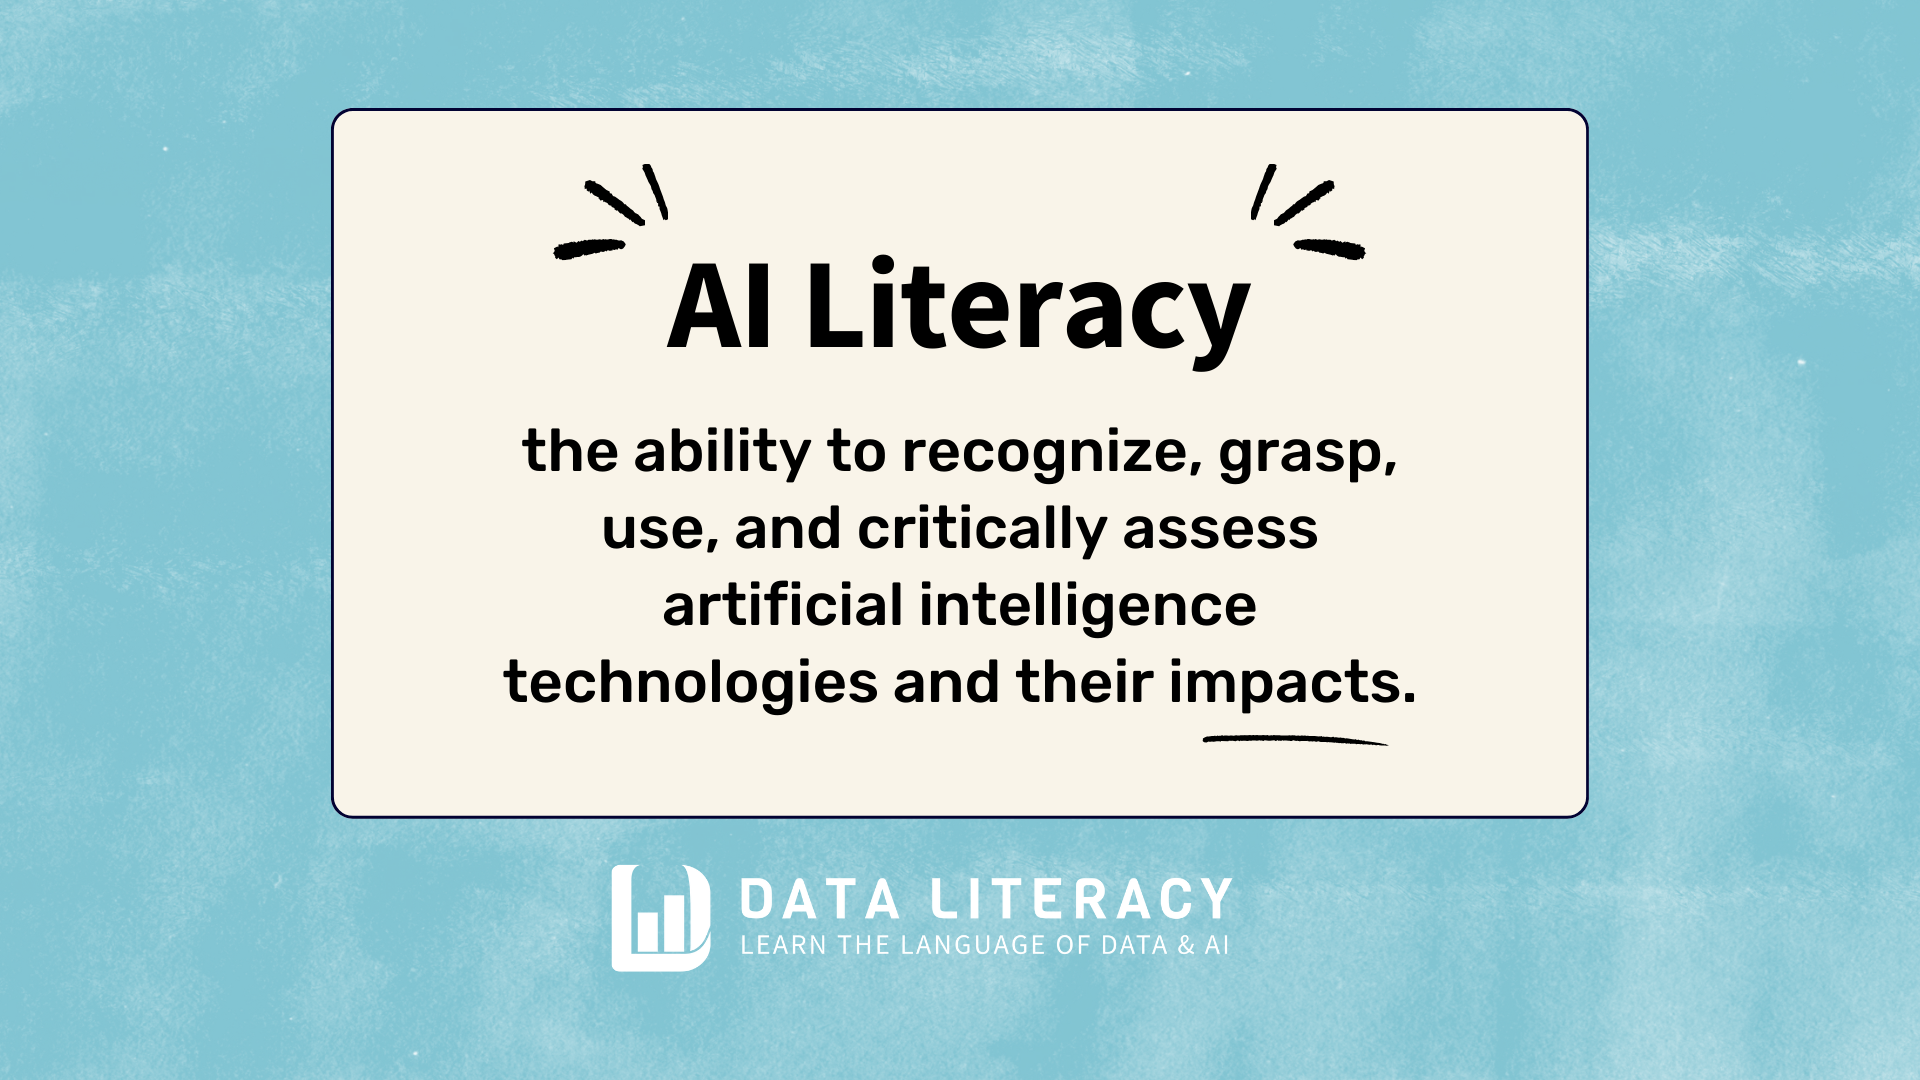 AI Literacy is the ability to recognize, grasp, engage with, and critically assess artificial intelligence technologies and their impacts.